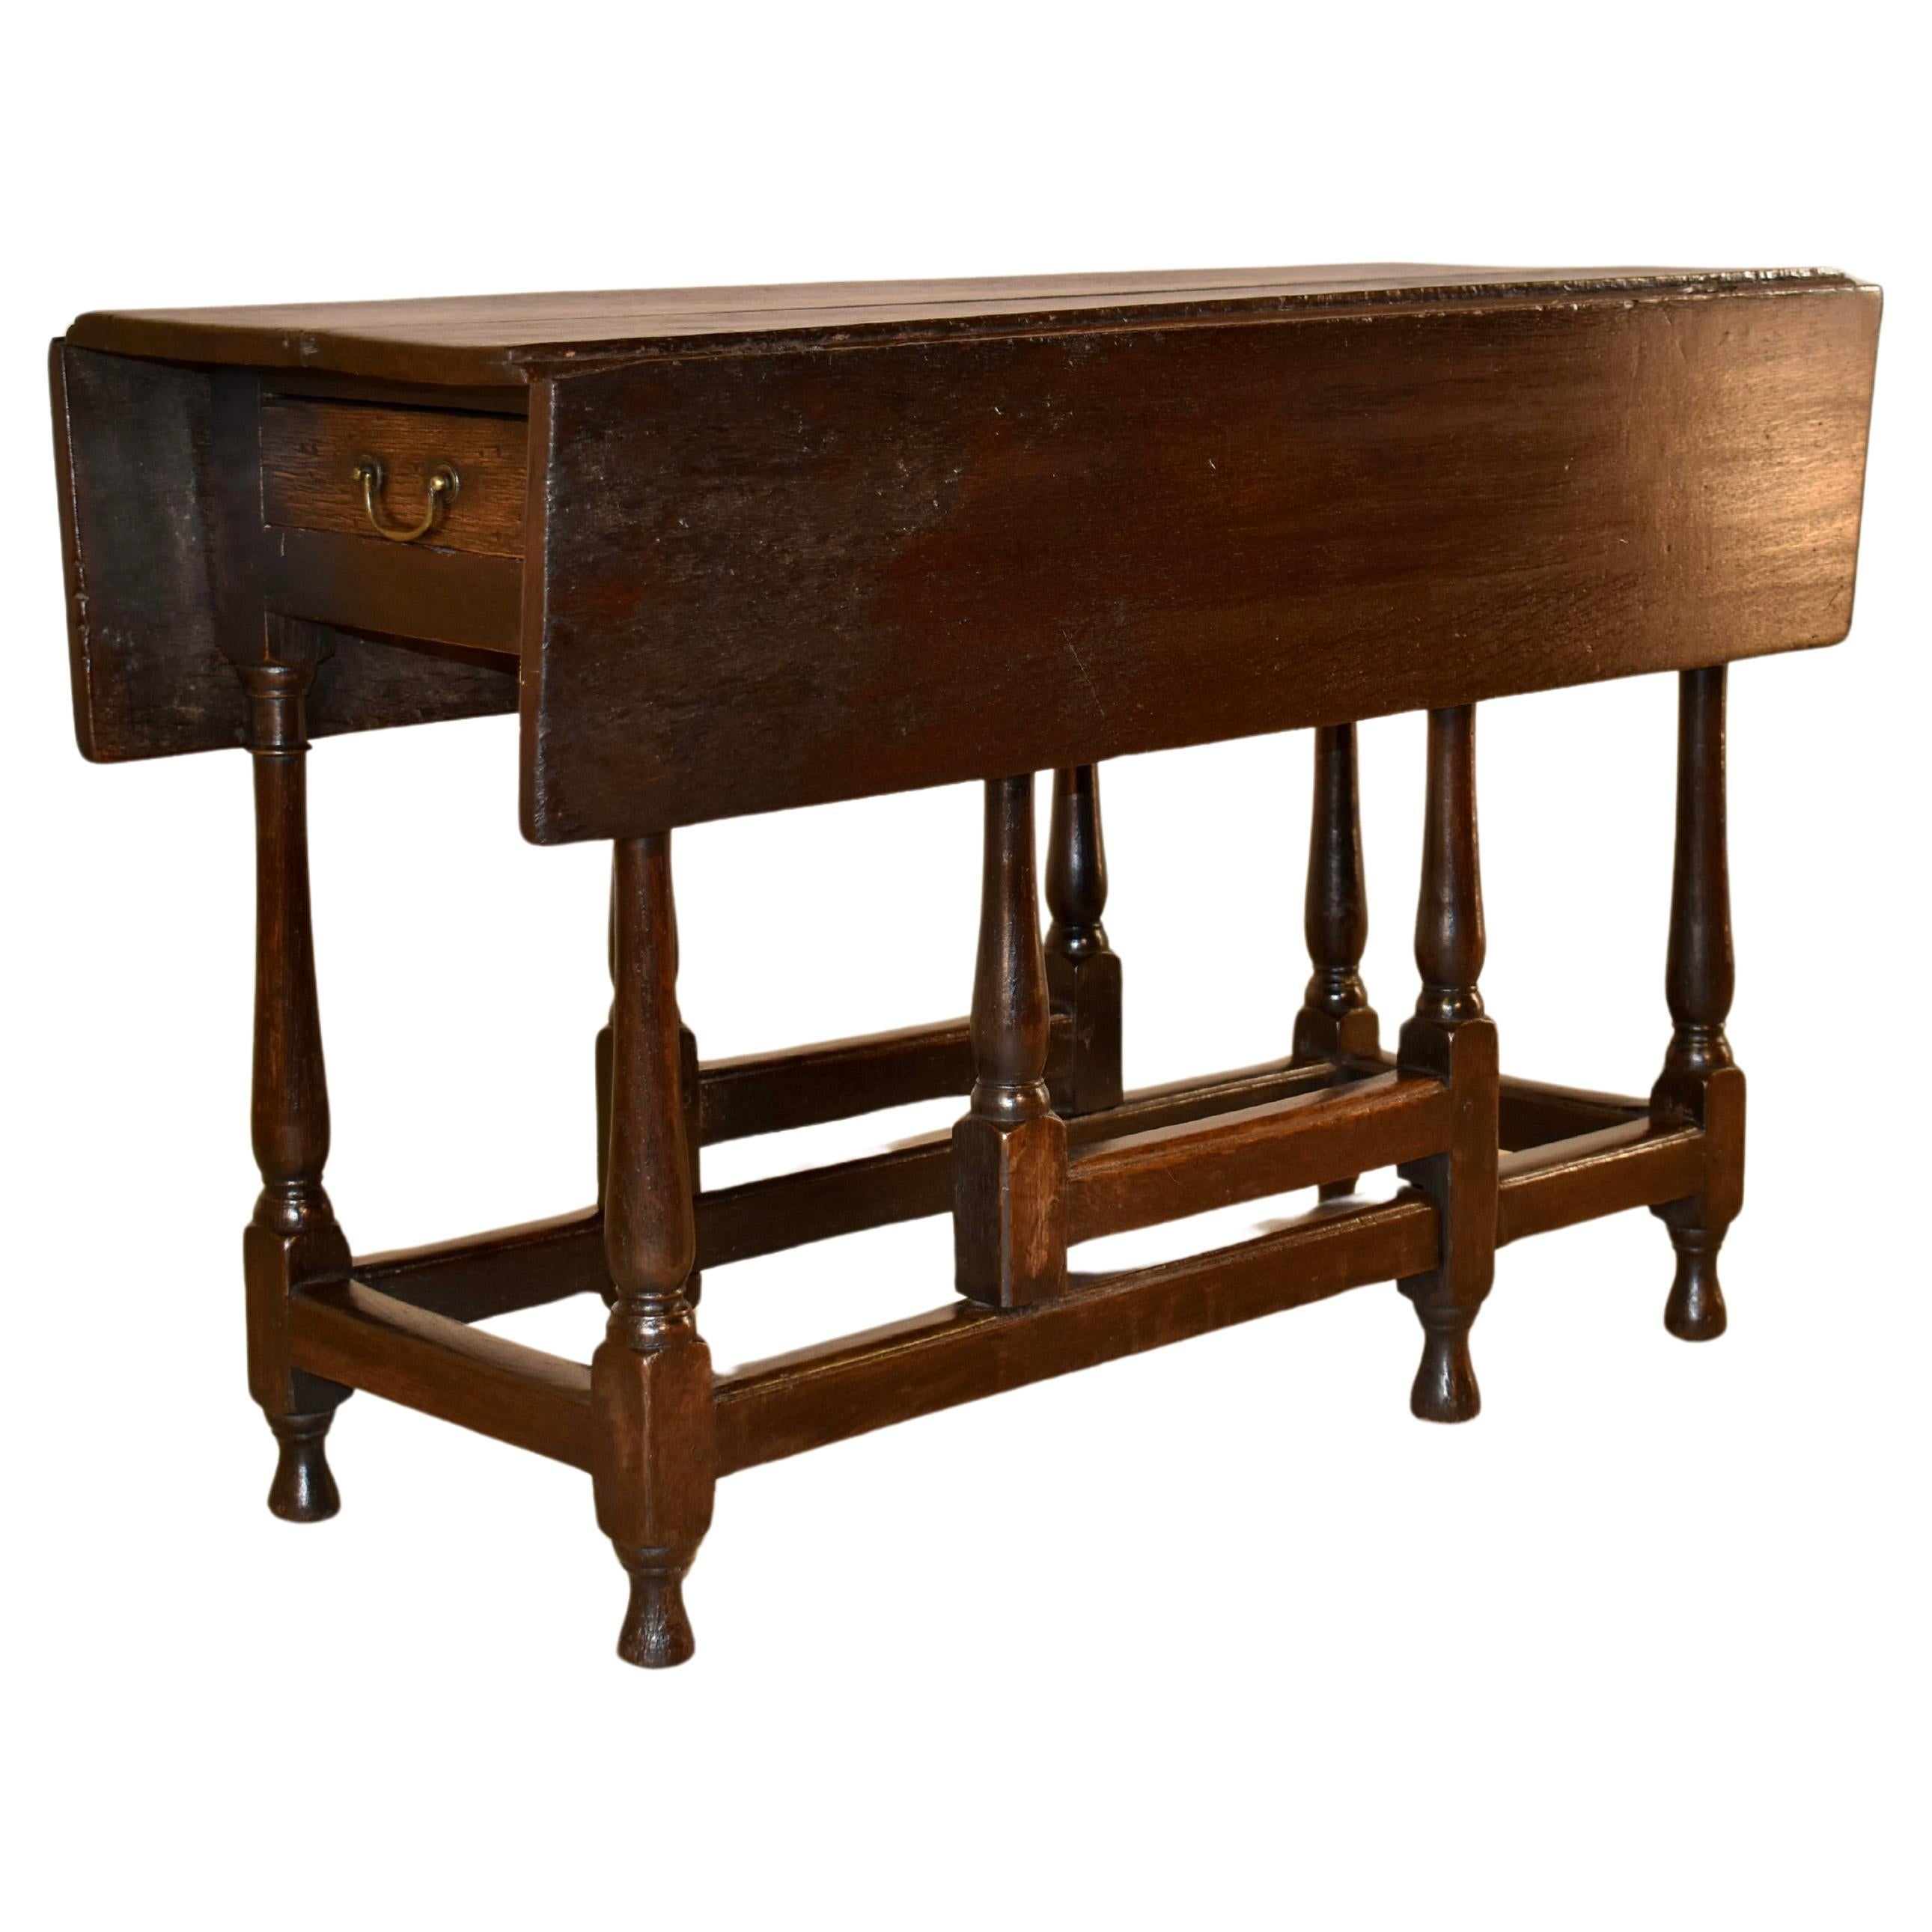 Late 17th - Early 18th Century Drop Leaf Table from England For Sale